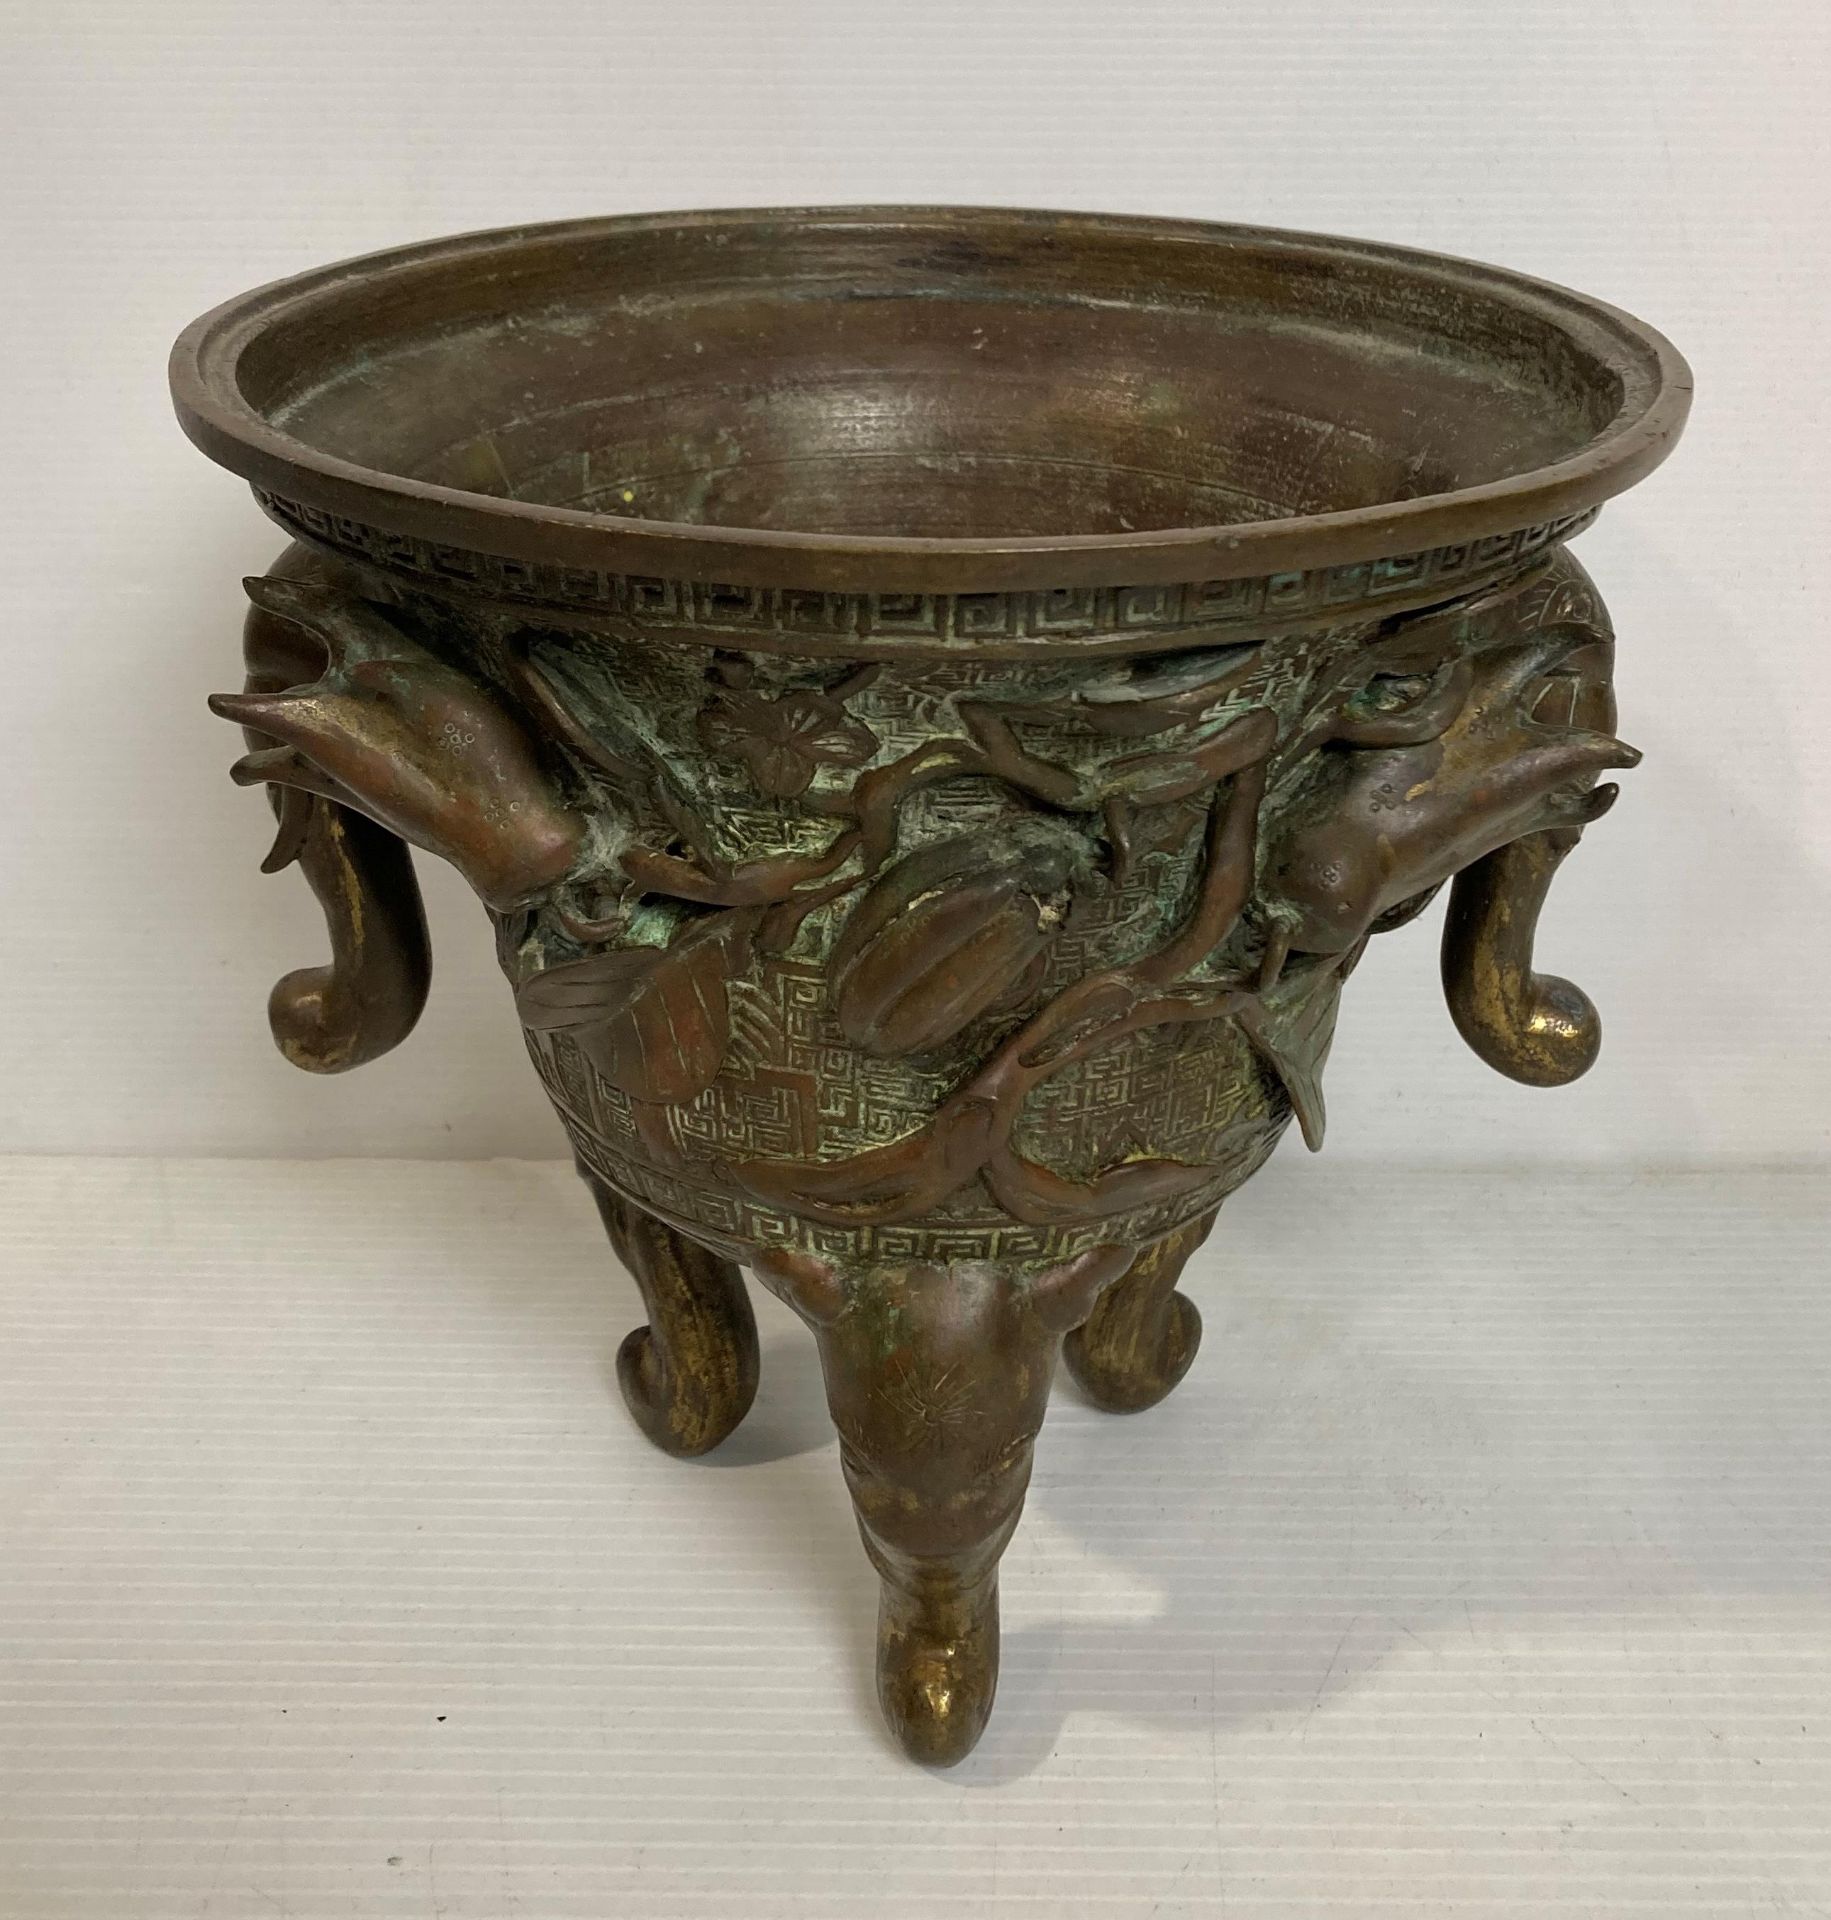 An Oriental bronze incense burner with elephant head legs and two elephant head handles with